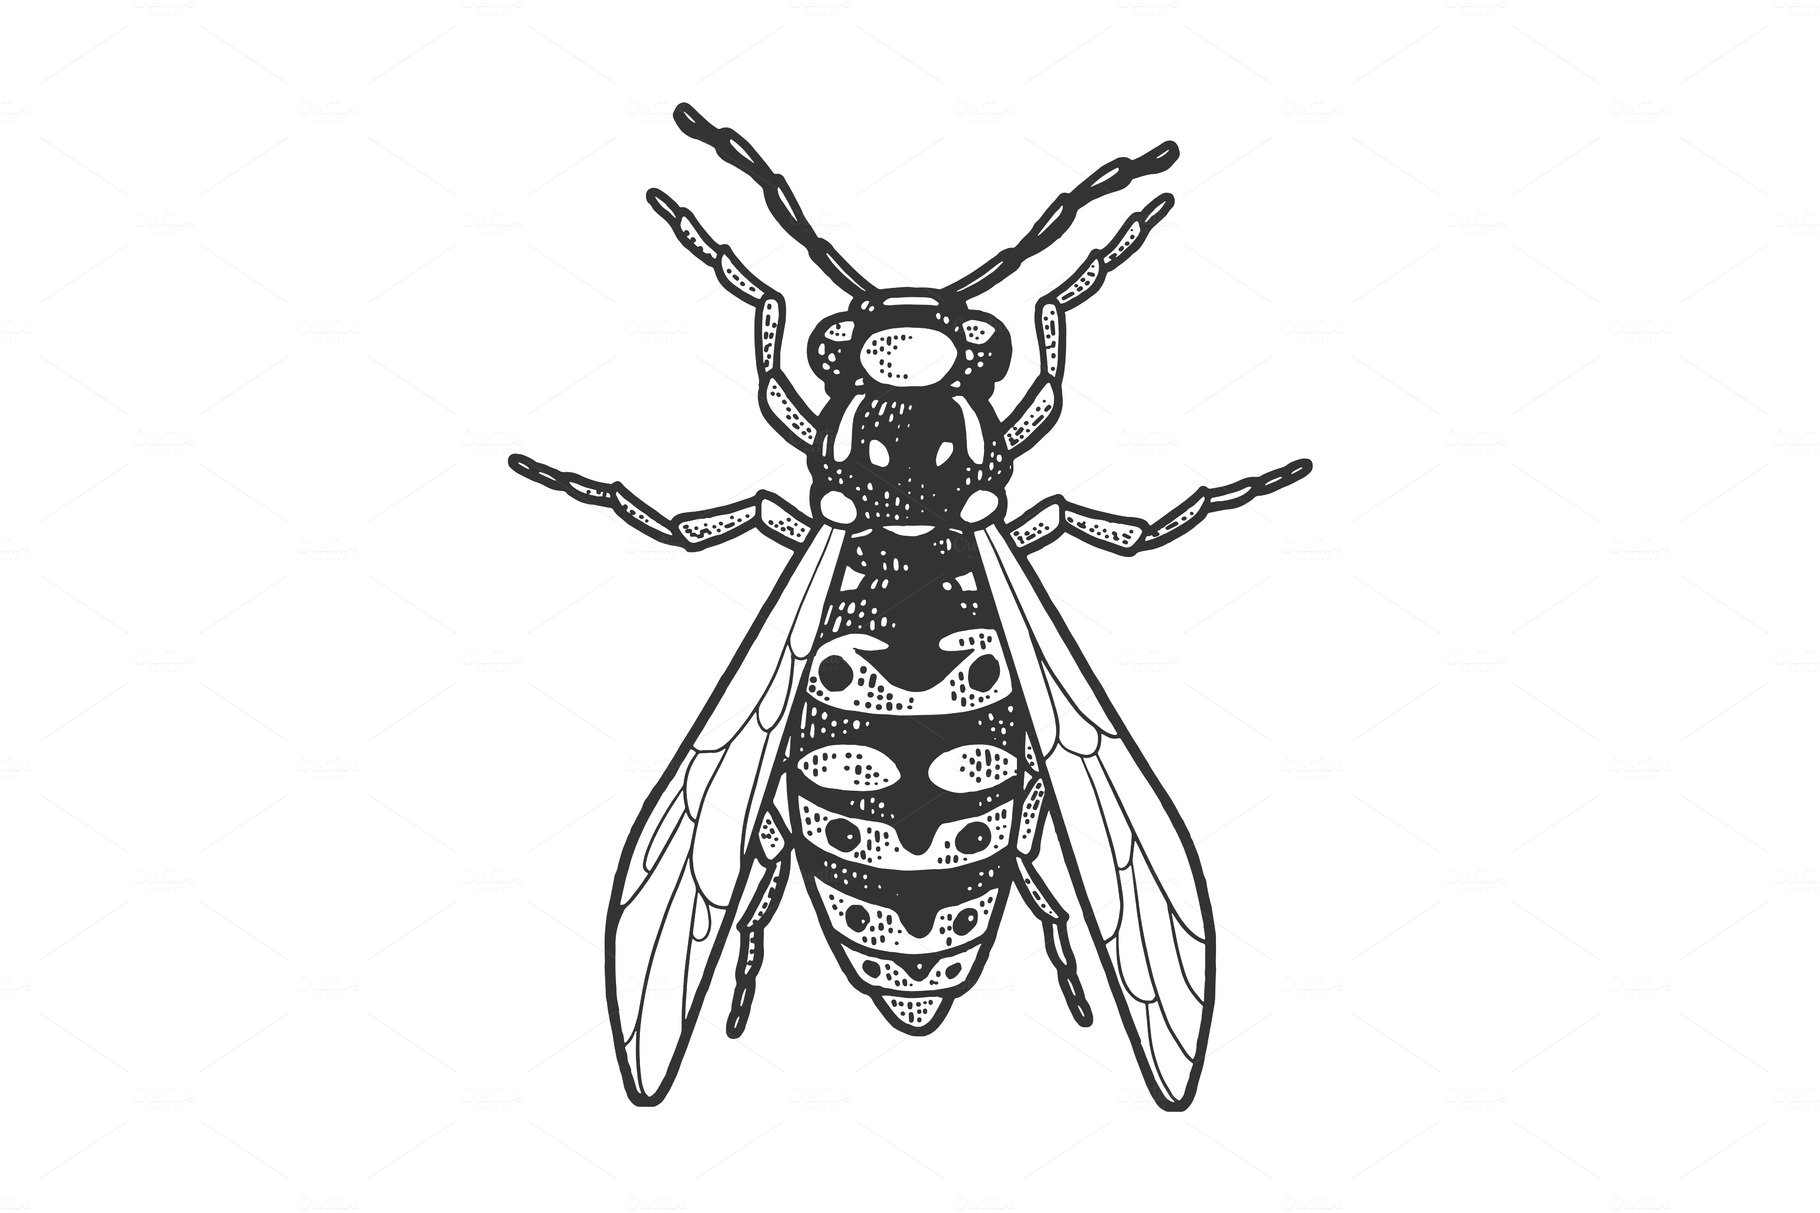 wasp insect sketch vector cover image.